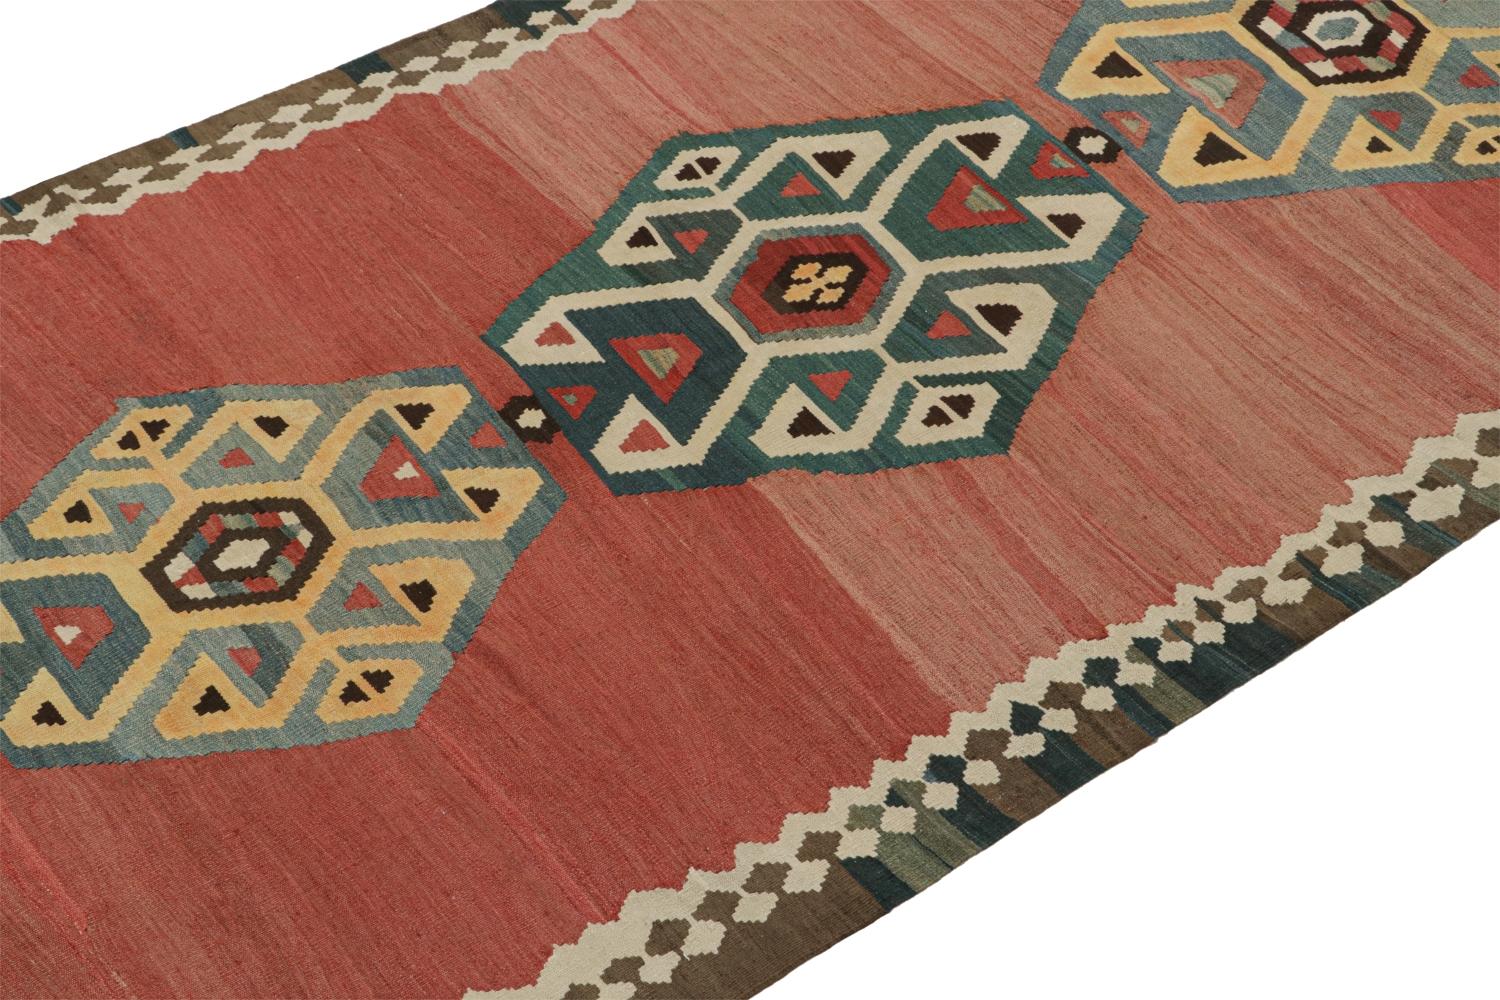 This vintage 5x12 Persian Kilim is a midcentury tribal rug that we believe originates from the Shahsavan tribe. 

On the Design:

Handwoven in wool circa 1950-1960, its design enjoys polychromatic medallions patterns on a red open field.